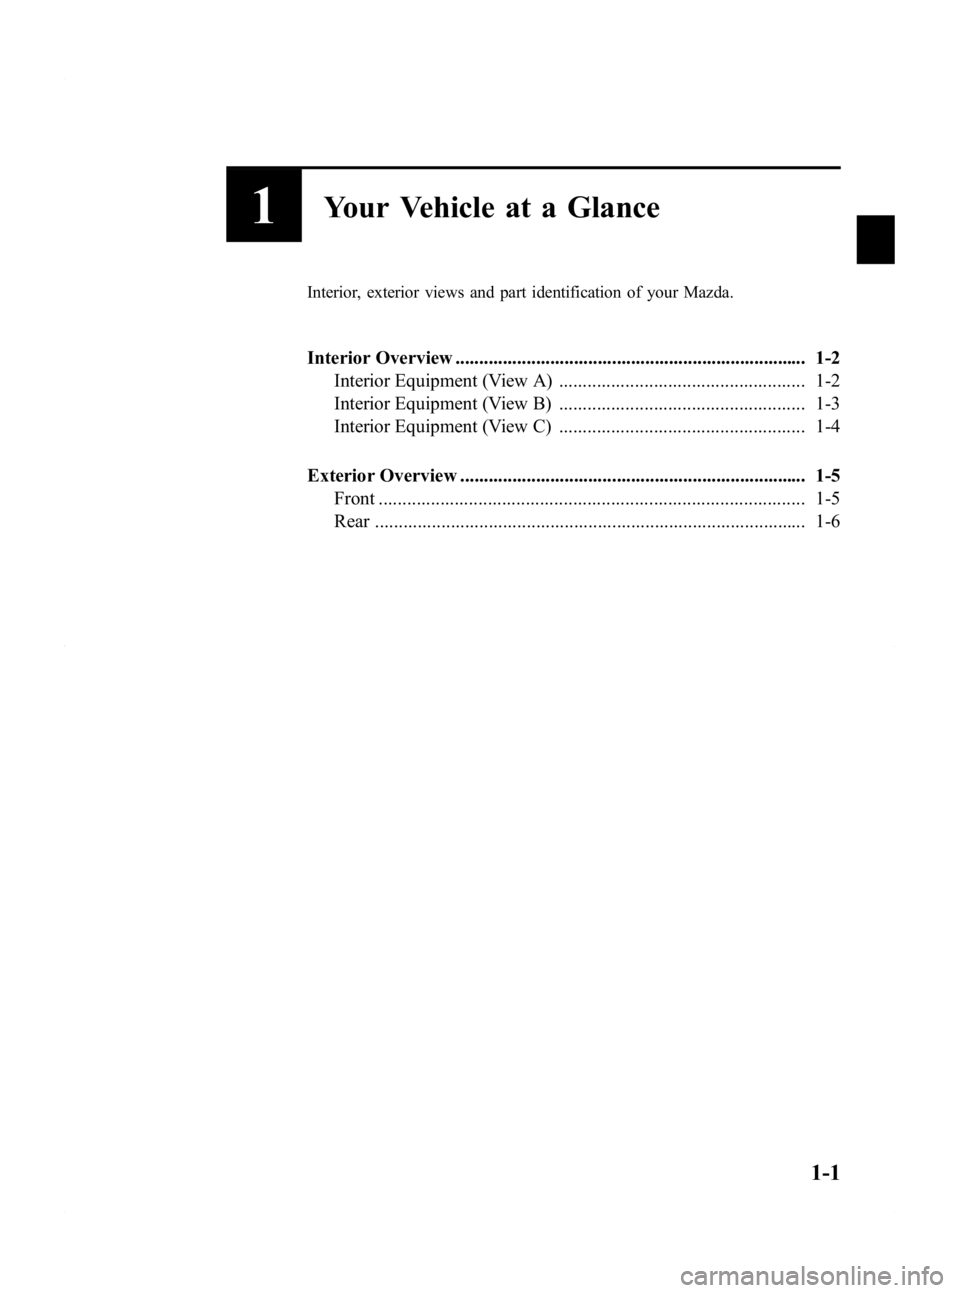 MAZDA MODEL 2 2011  Owners Manual Black plate (7,1)
1Your Vehicle at a Glance
Interior, exterior views and part identification of your Mazda.
Interior Overview ..........................................................................